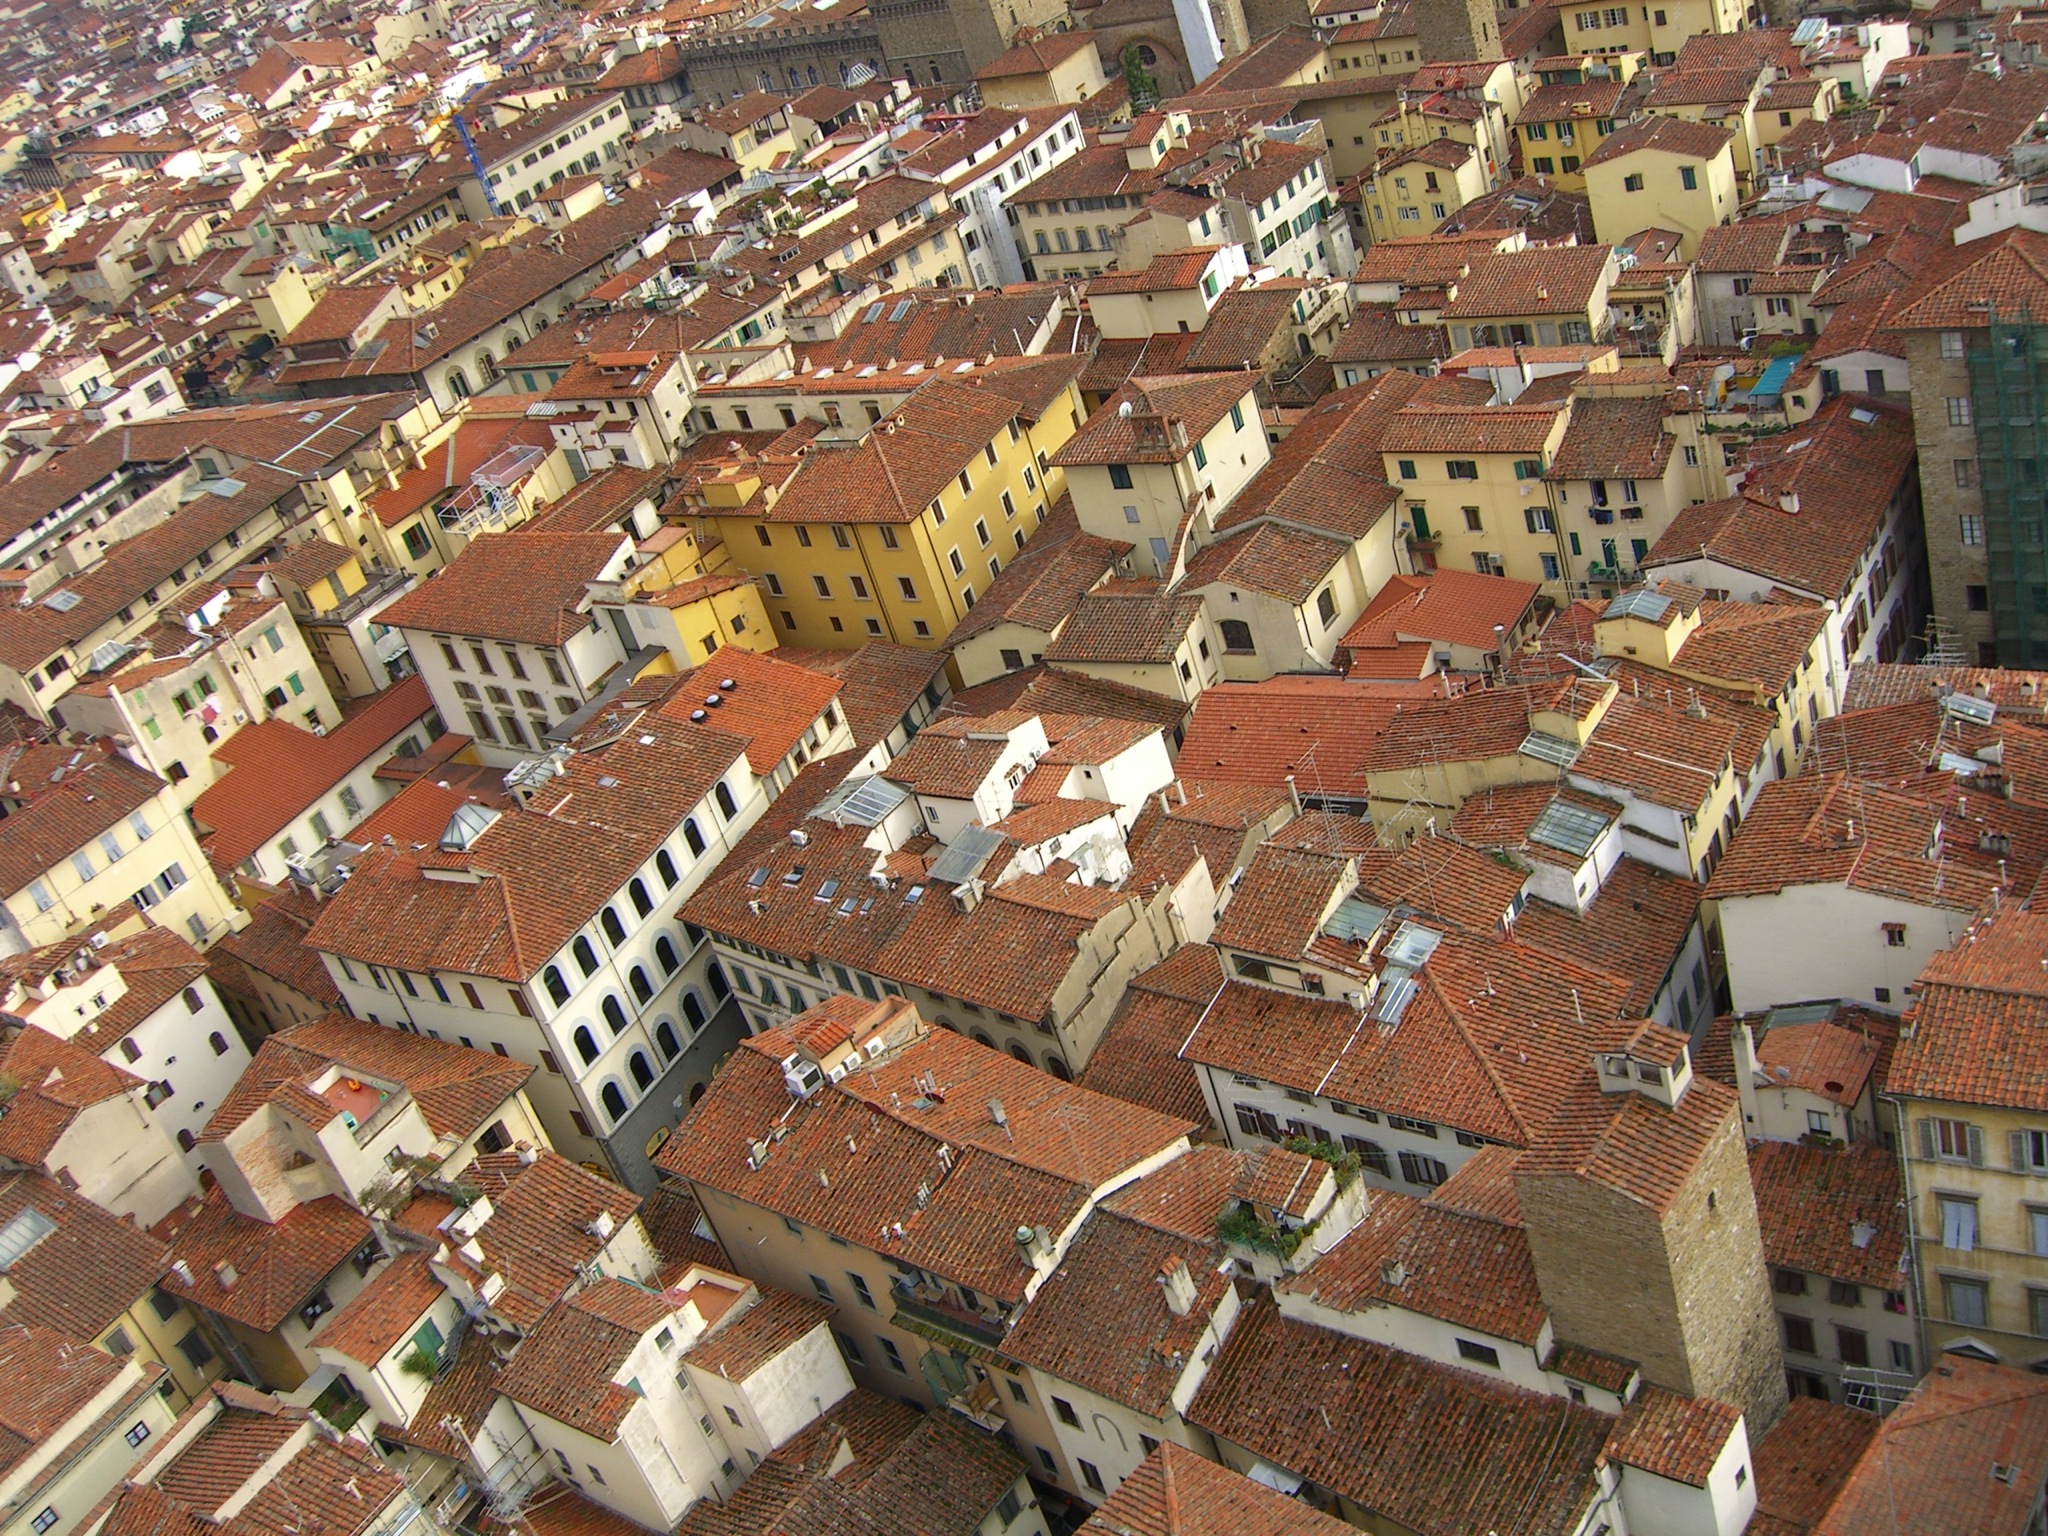 the rooftops of many buildings and roofs are red